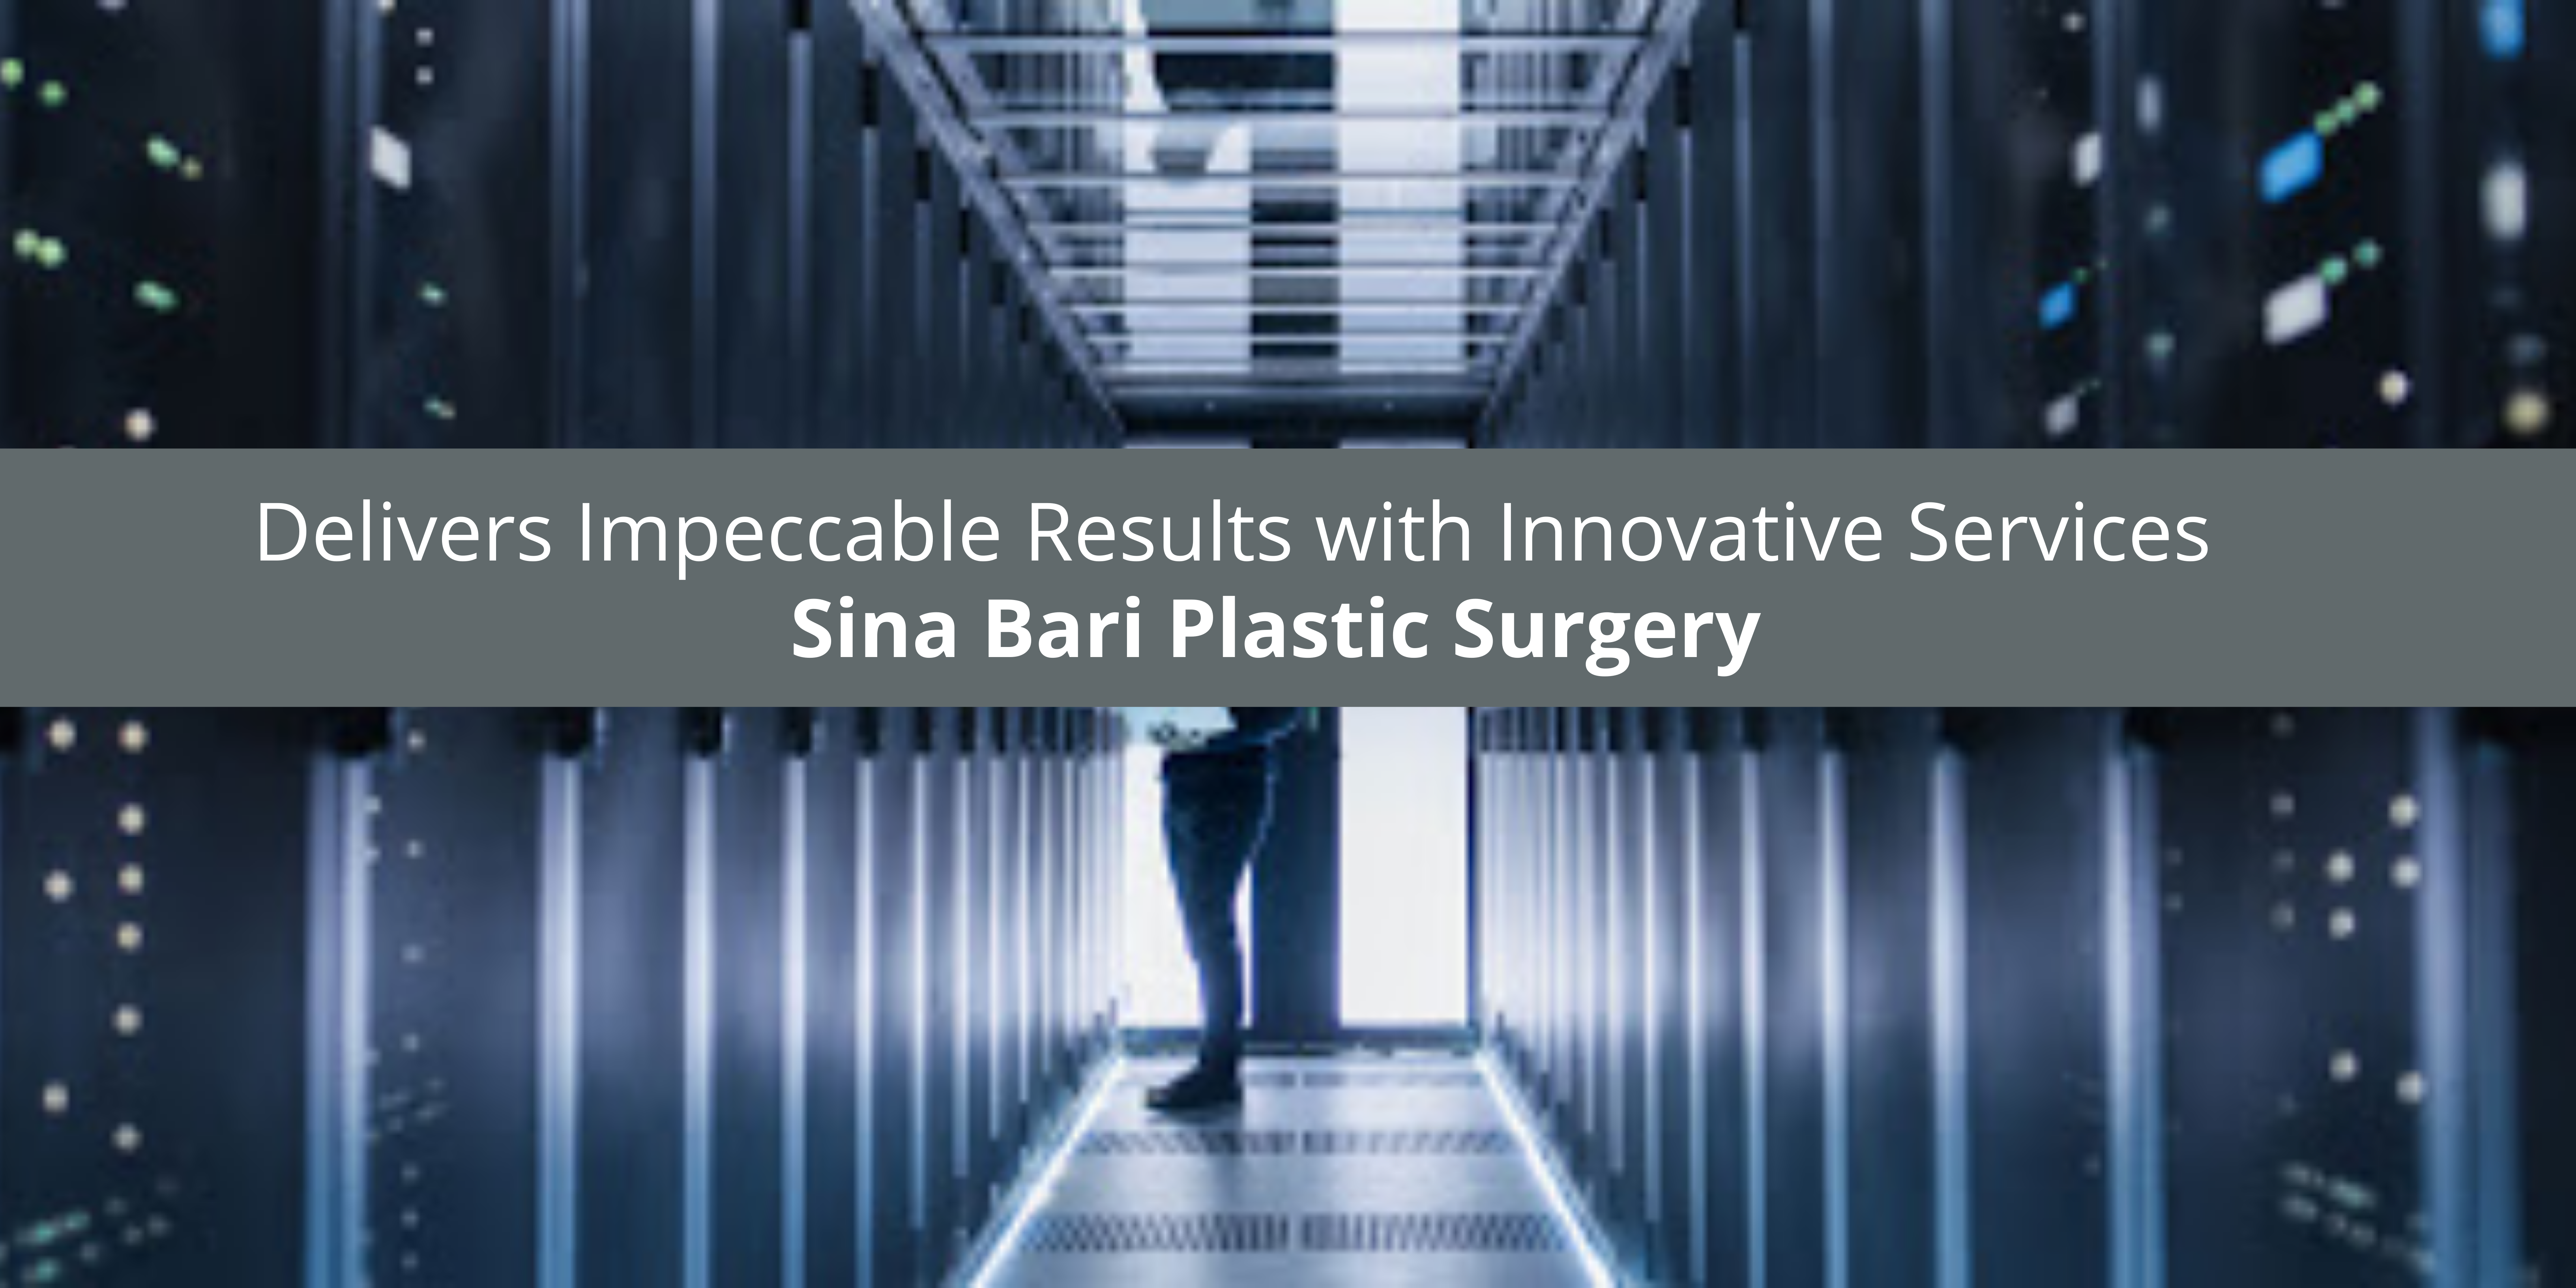 Sina Bari Plastic Surgery Delivers Impeccable Results with Innovative Services